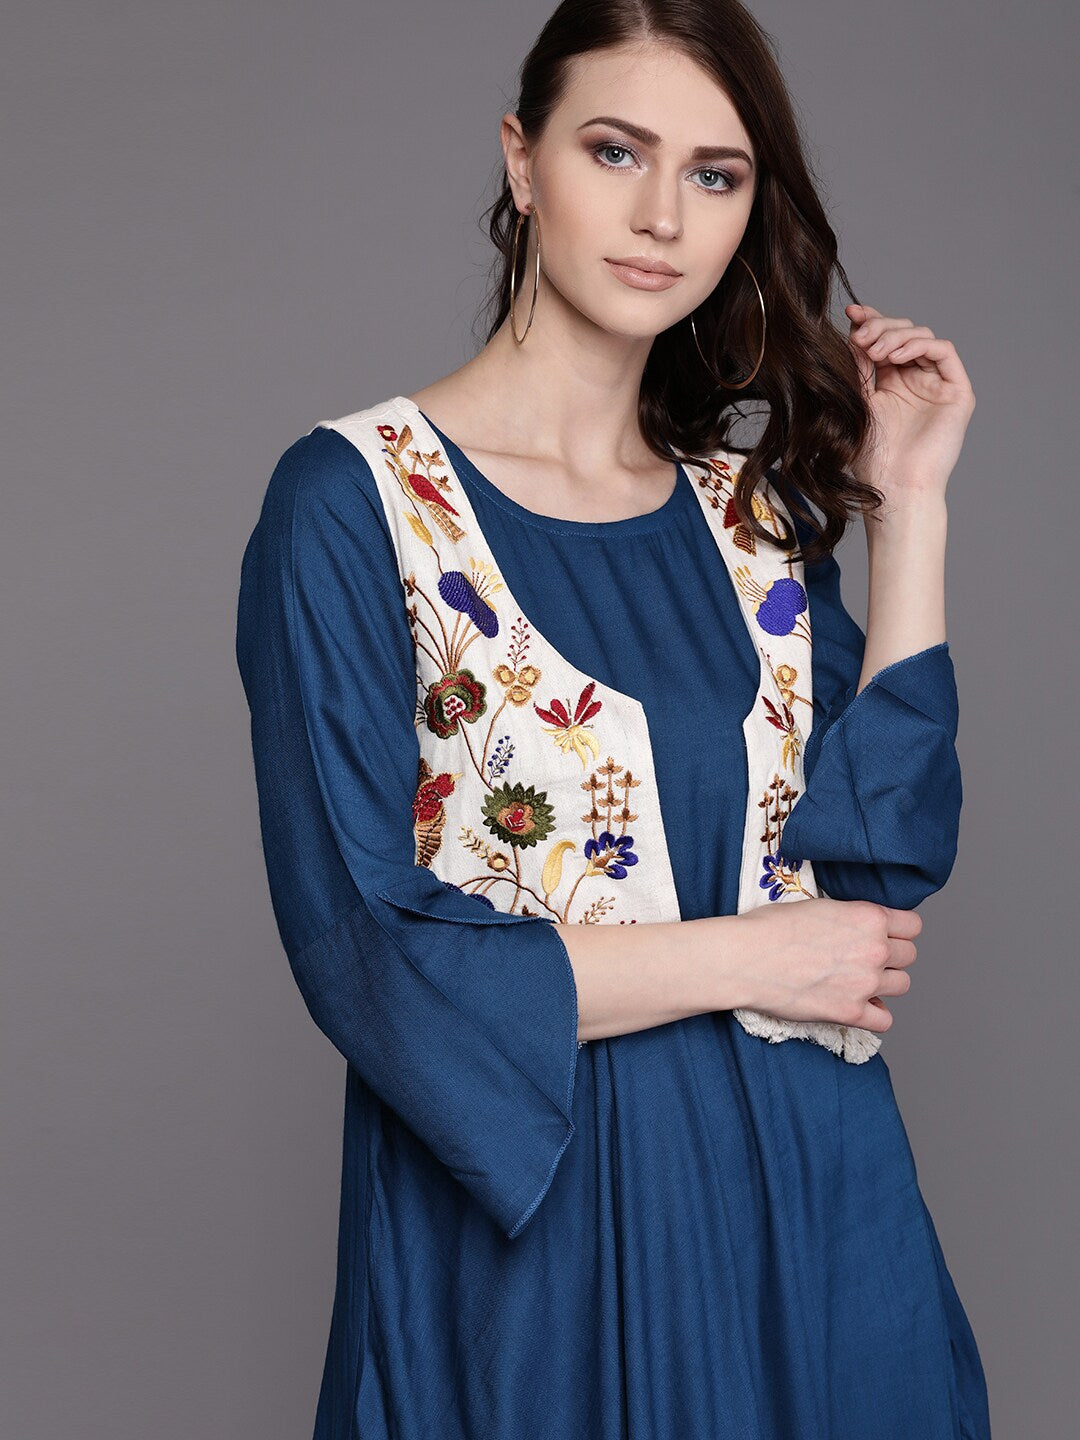 Women's Blue Maxi Gown with Floral Embroidered Jacket - Aks